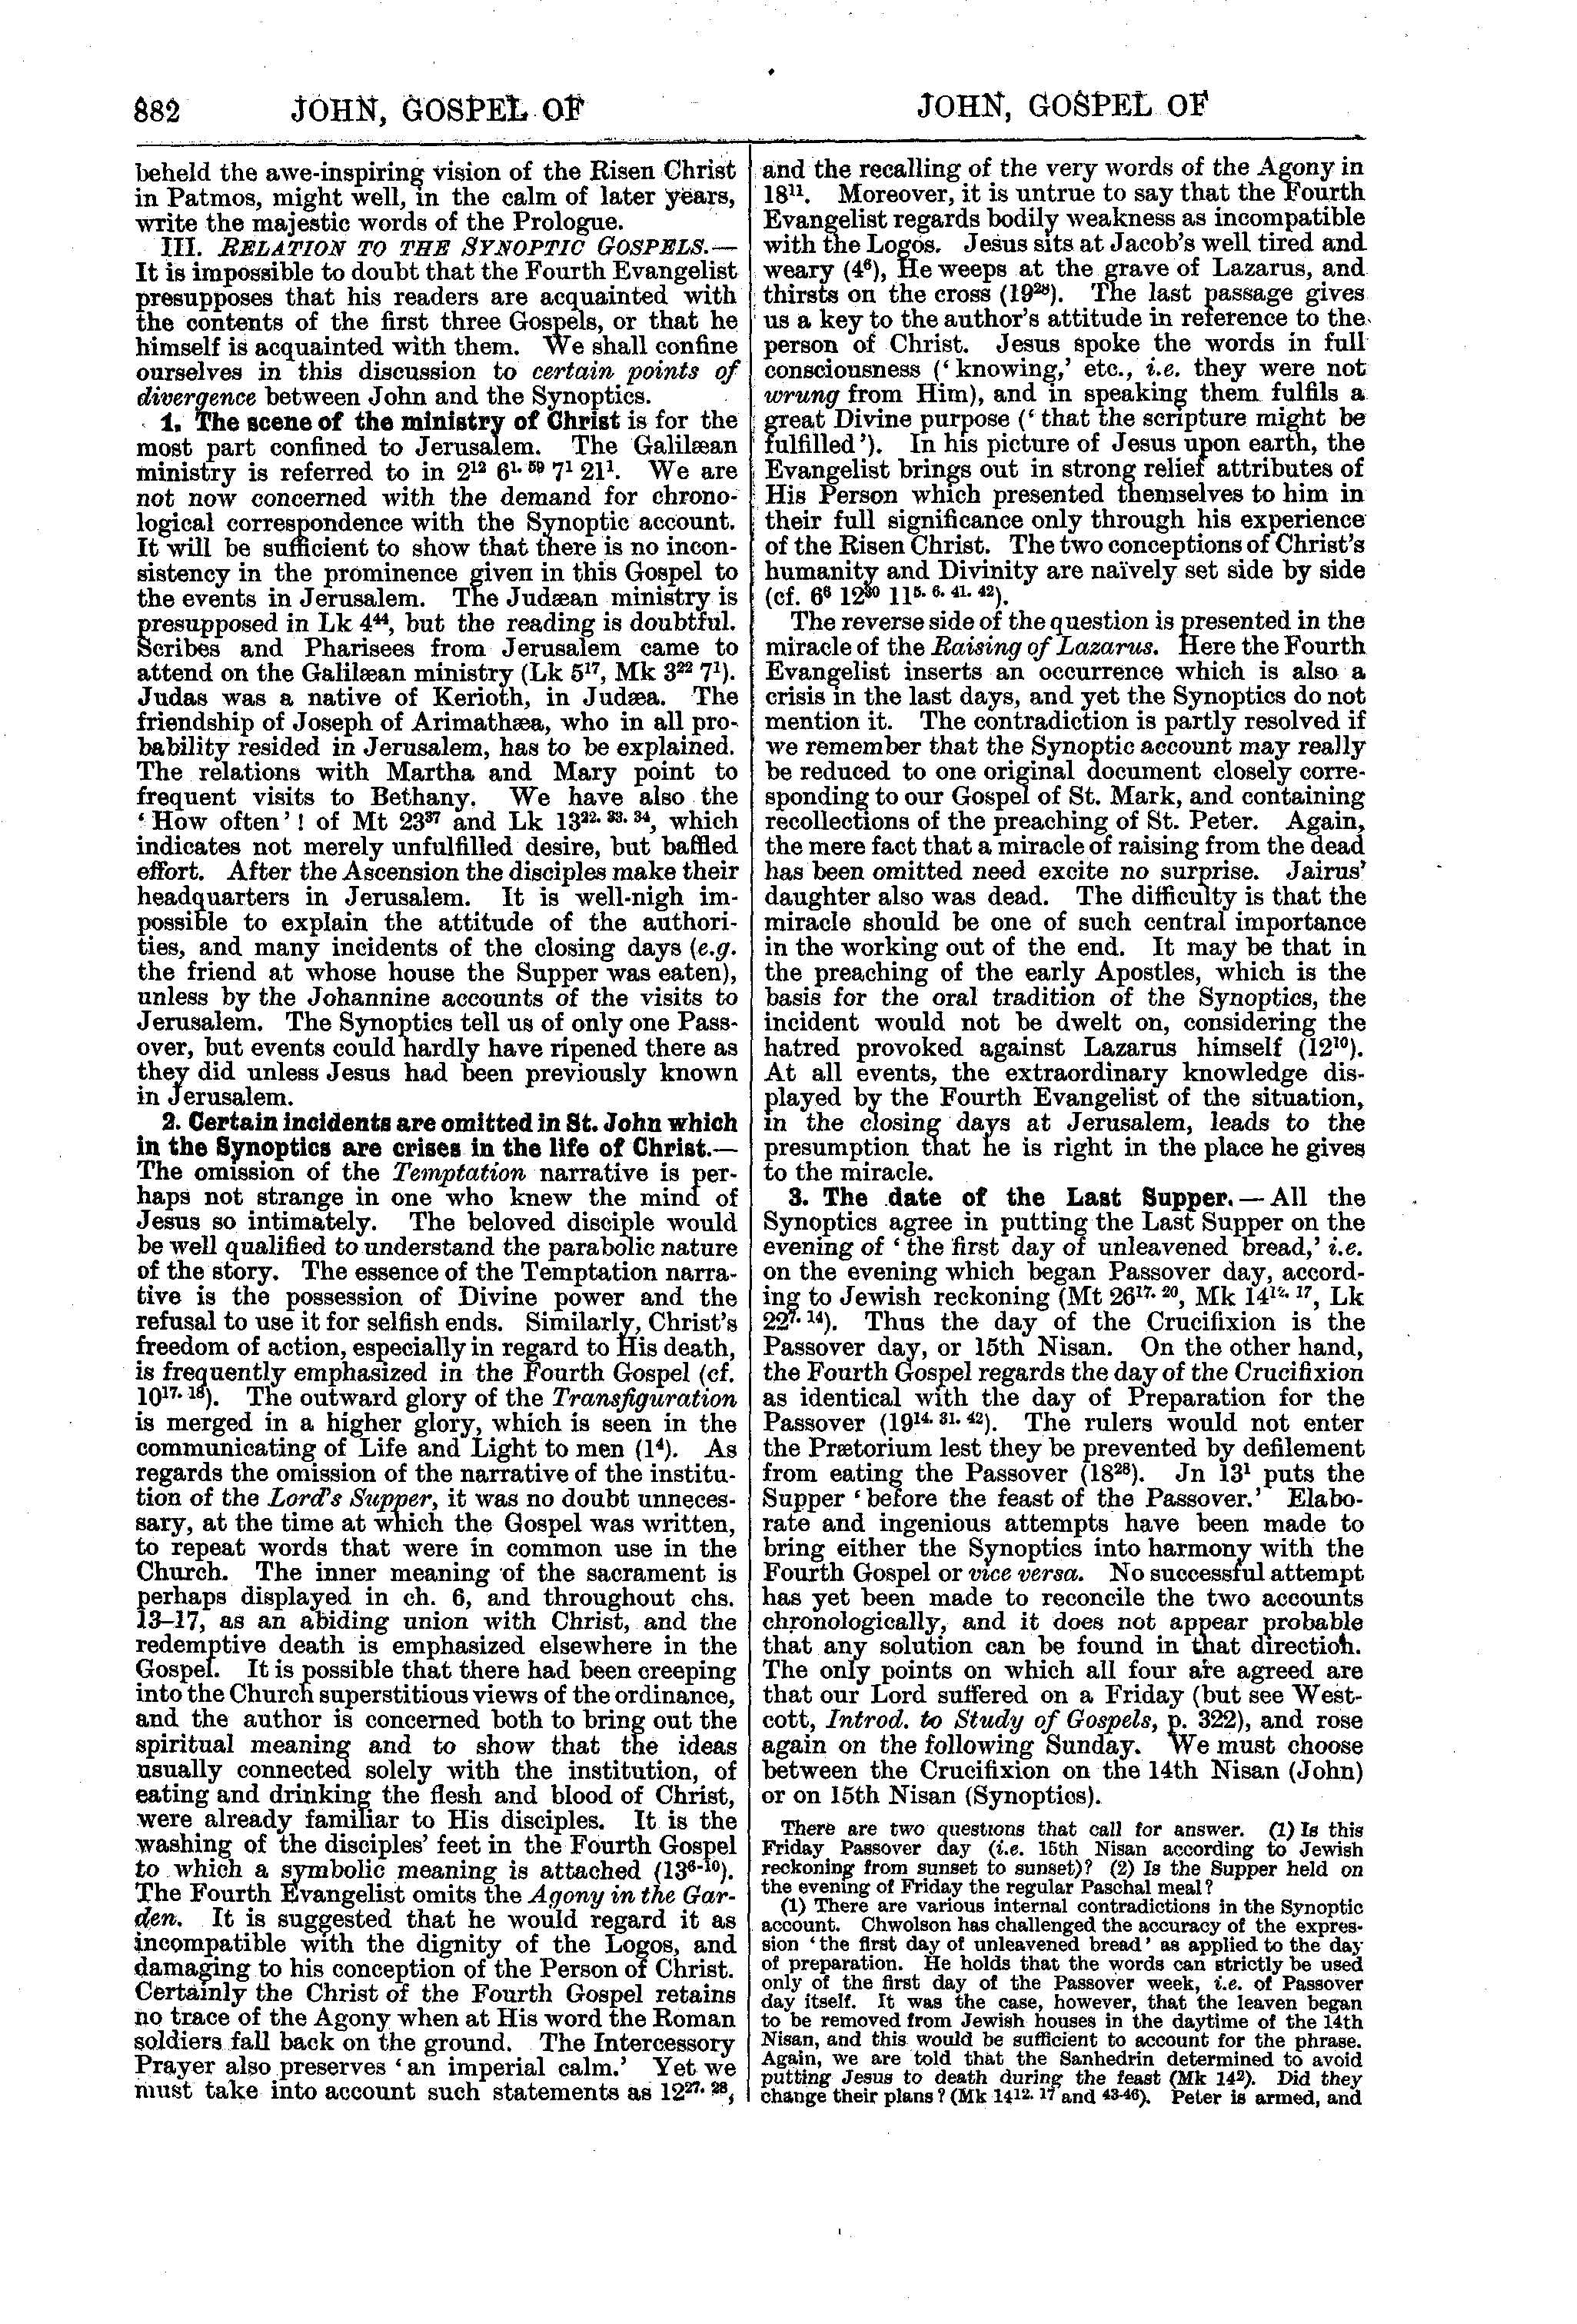 Image of page 882